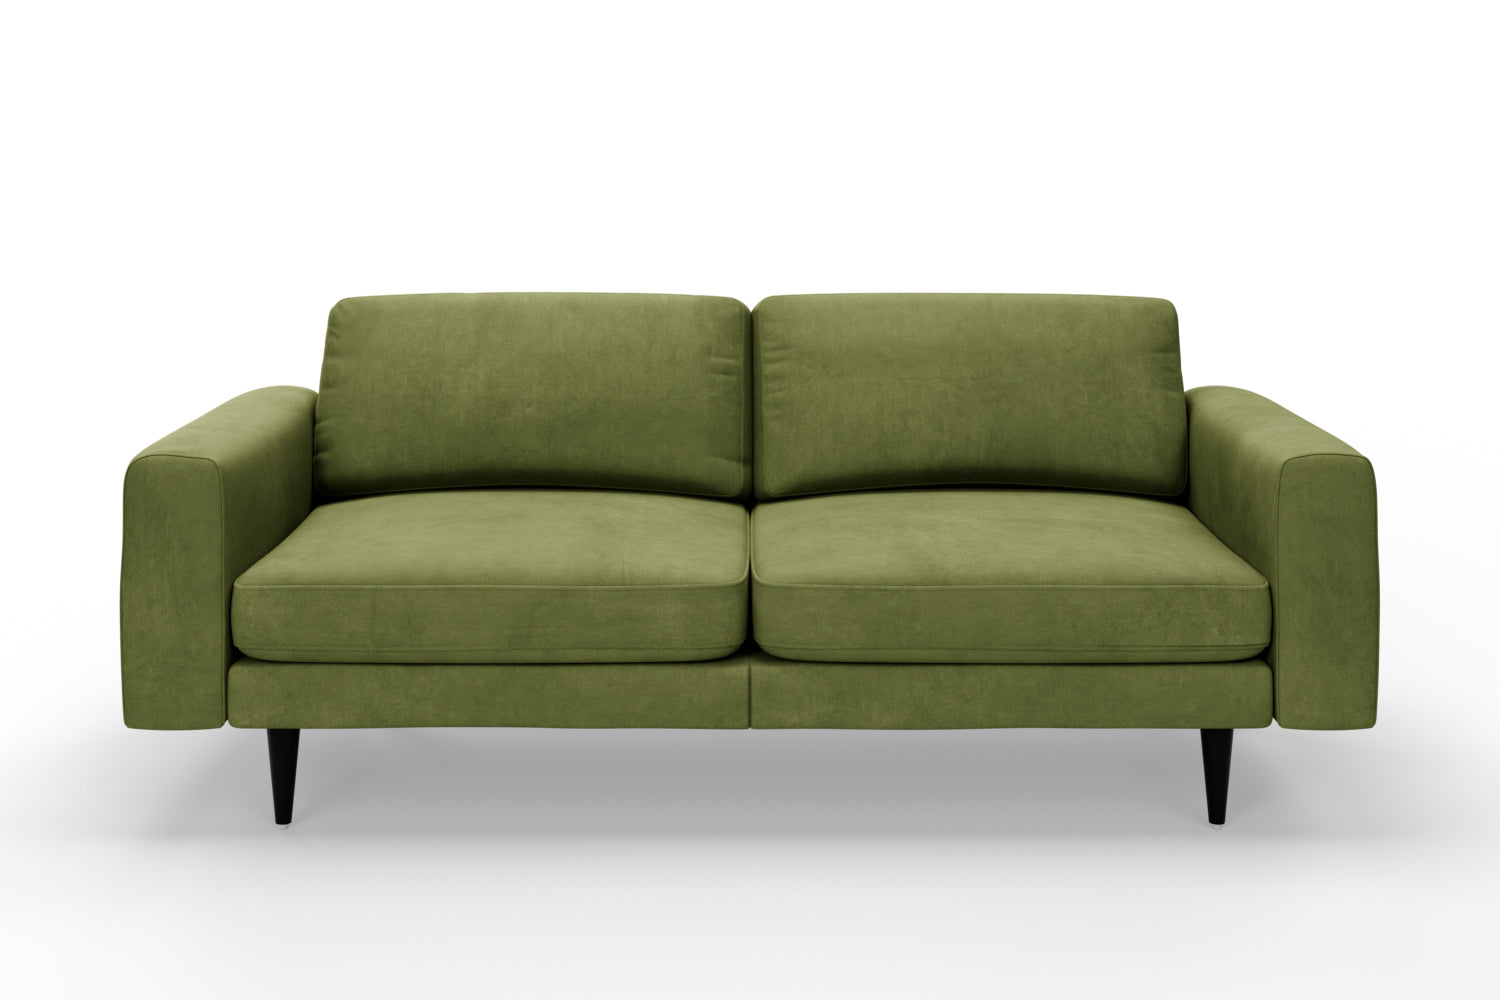 SNUG | The Big Chill 3 Seater Sofa in Olive variant_40502666166320